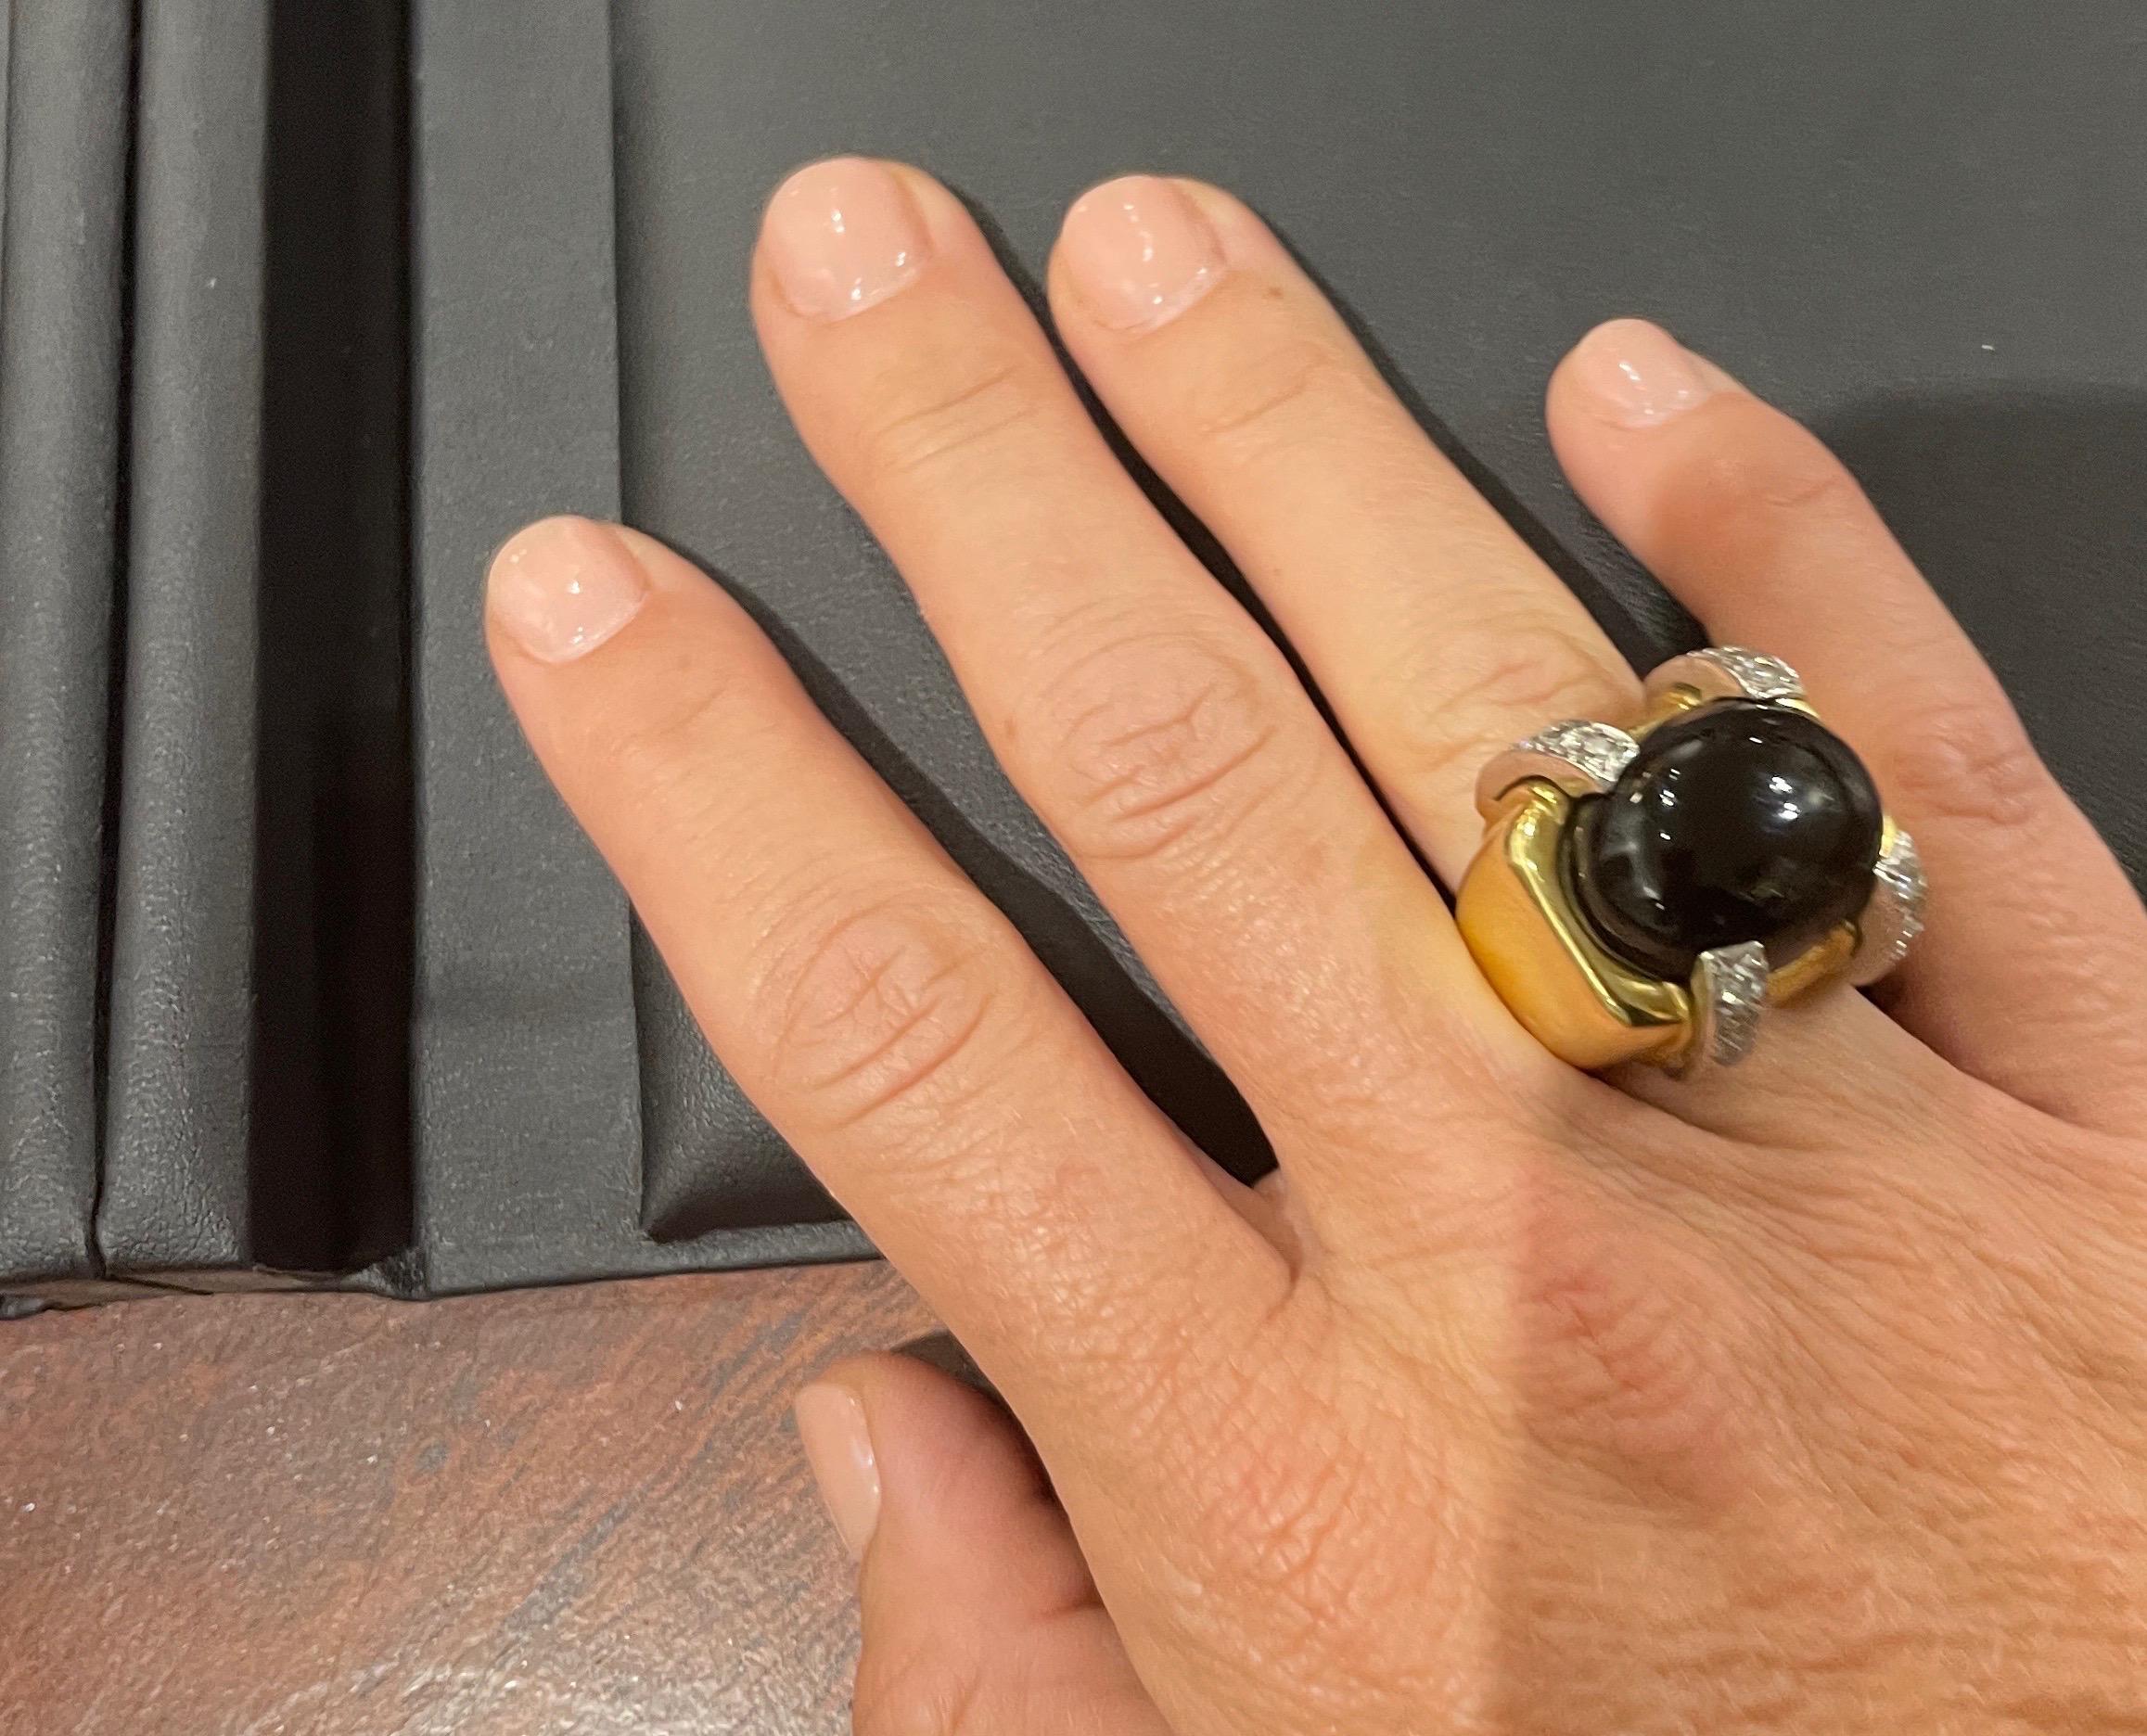 In David Webb style,  this gorgeous 18k yellow gold ring features a beautiful oval cabochon-cut black onyx accented by round brilliant-cut diamonds weighing approximately 0.48 carats in total. The ring does have a flexible guard band on the inside